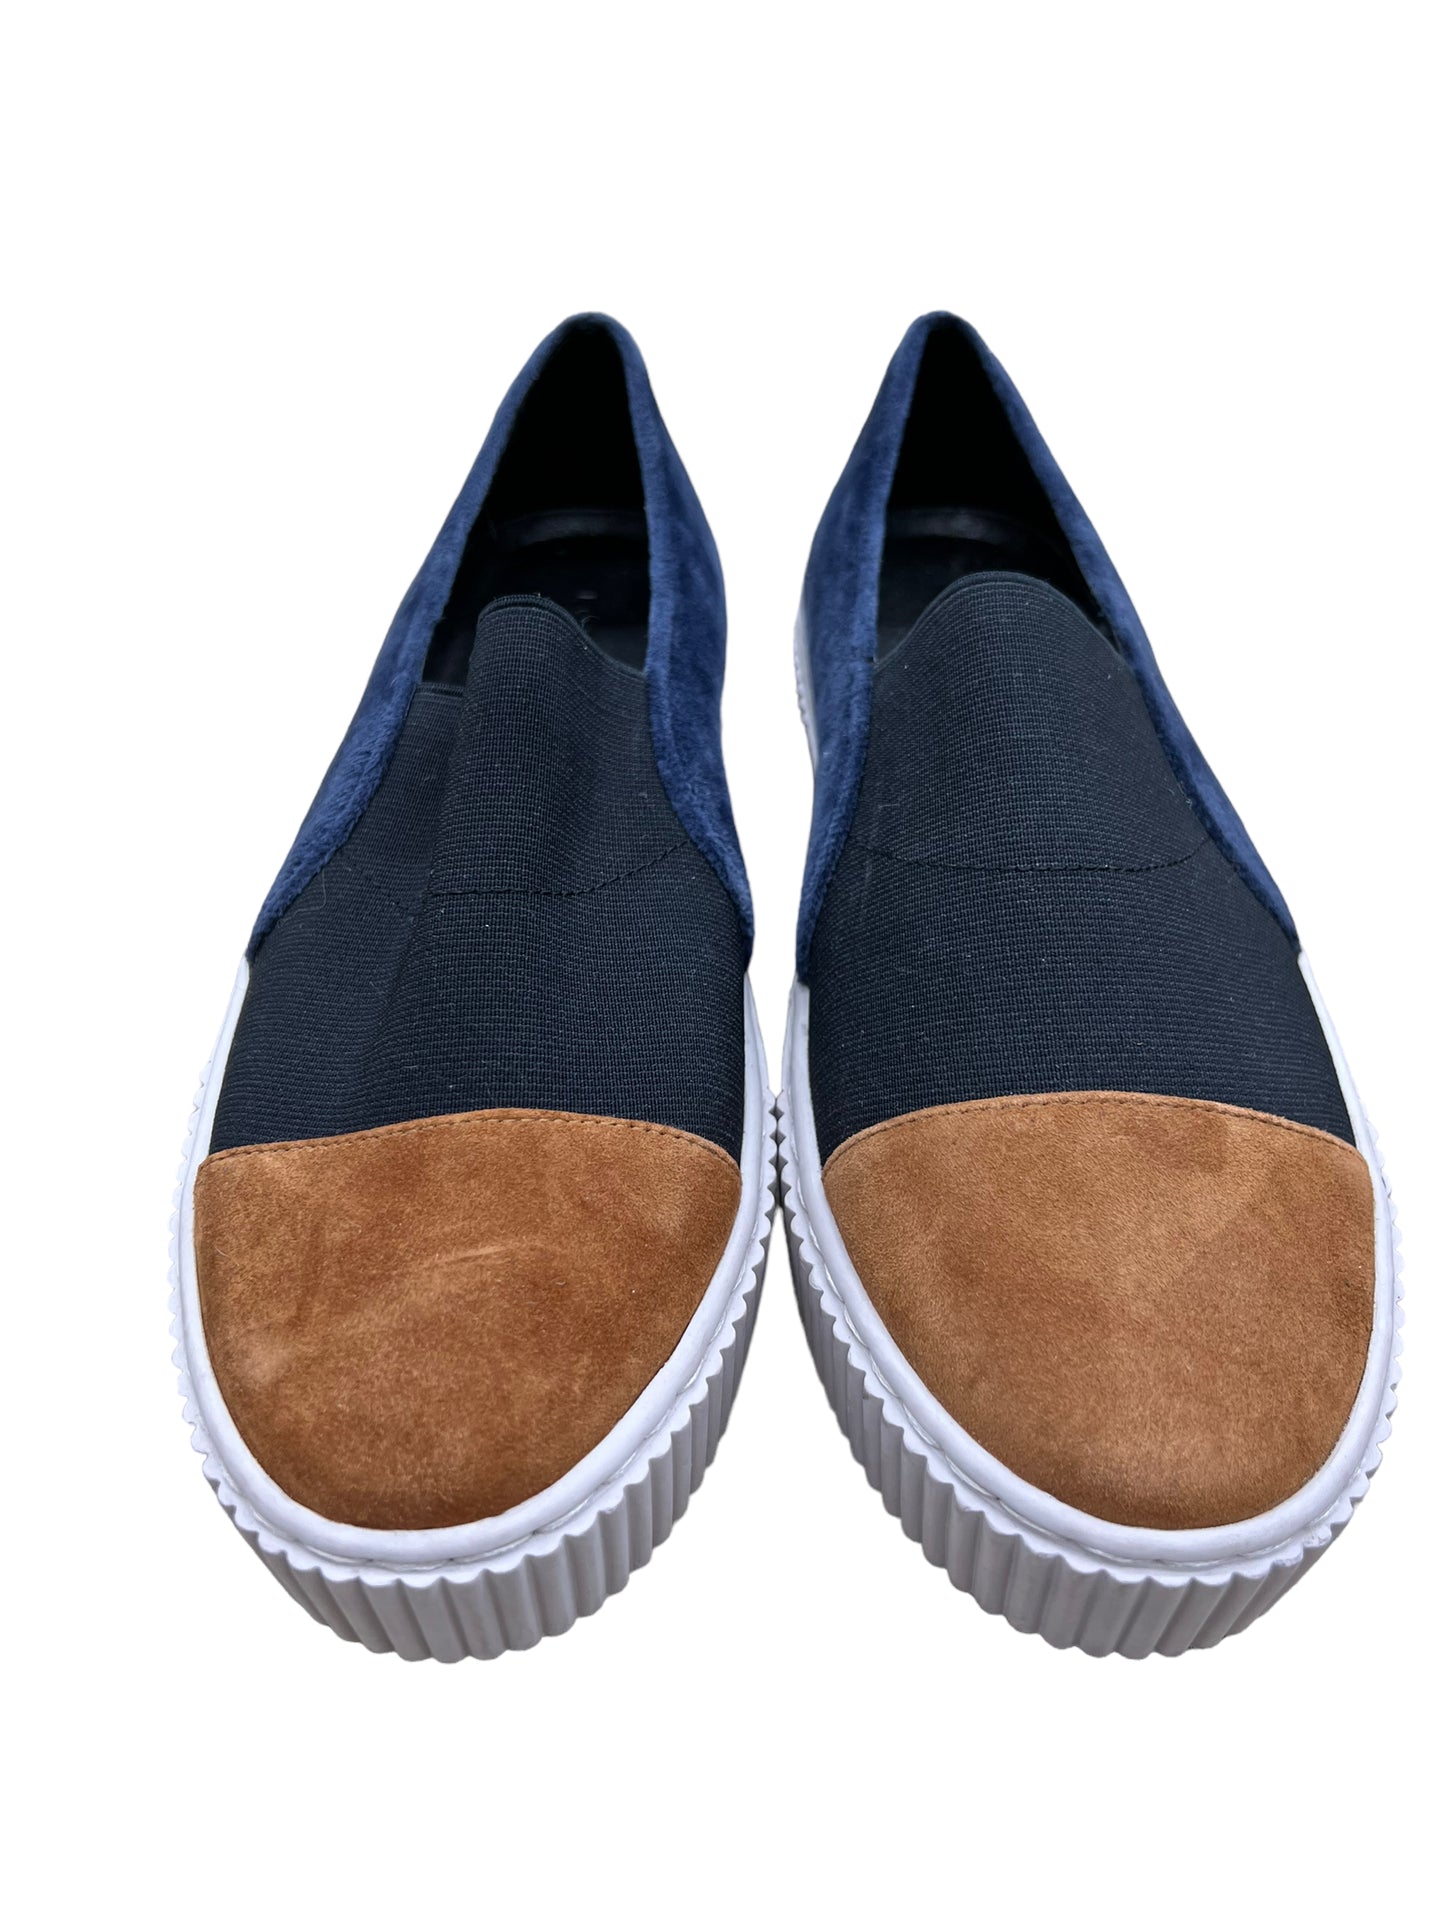 Shoes Flats Boat By Clothes Mentor  Size: 7